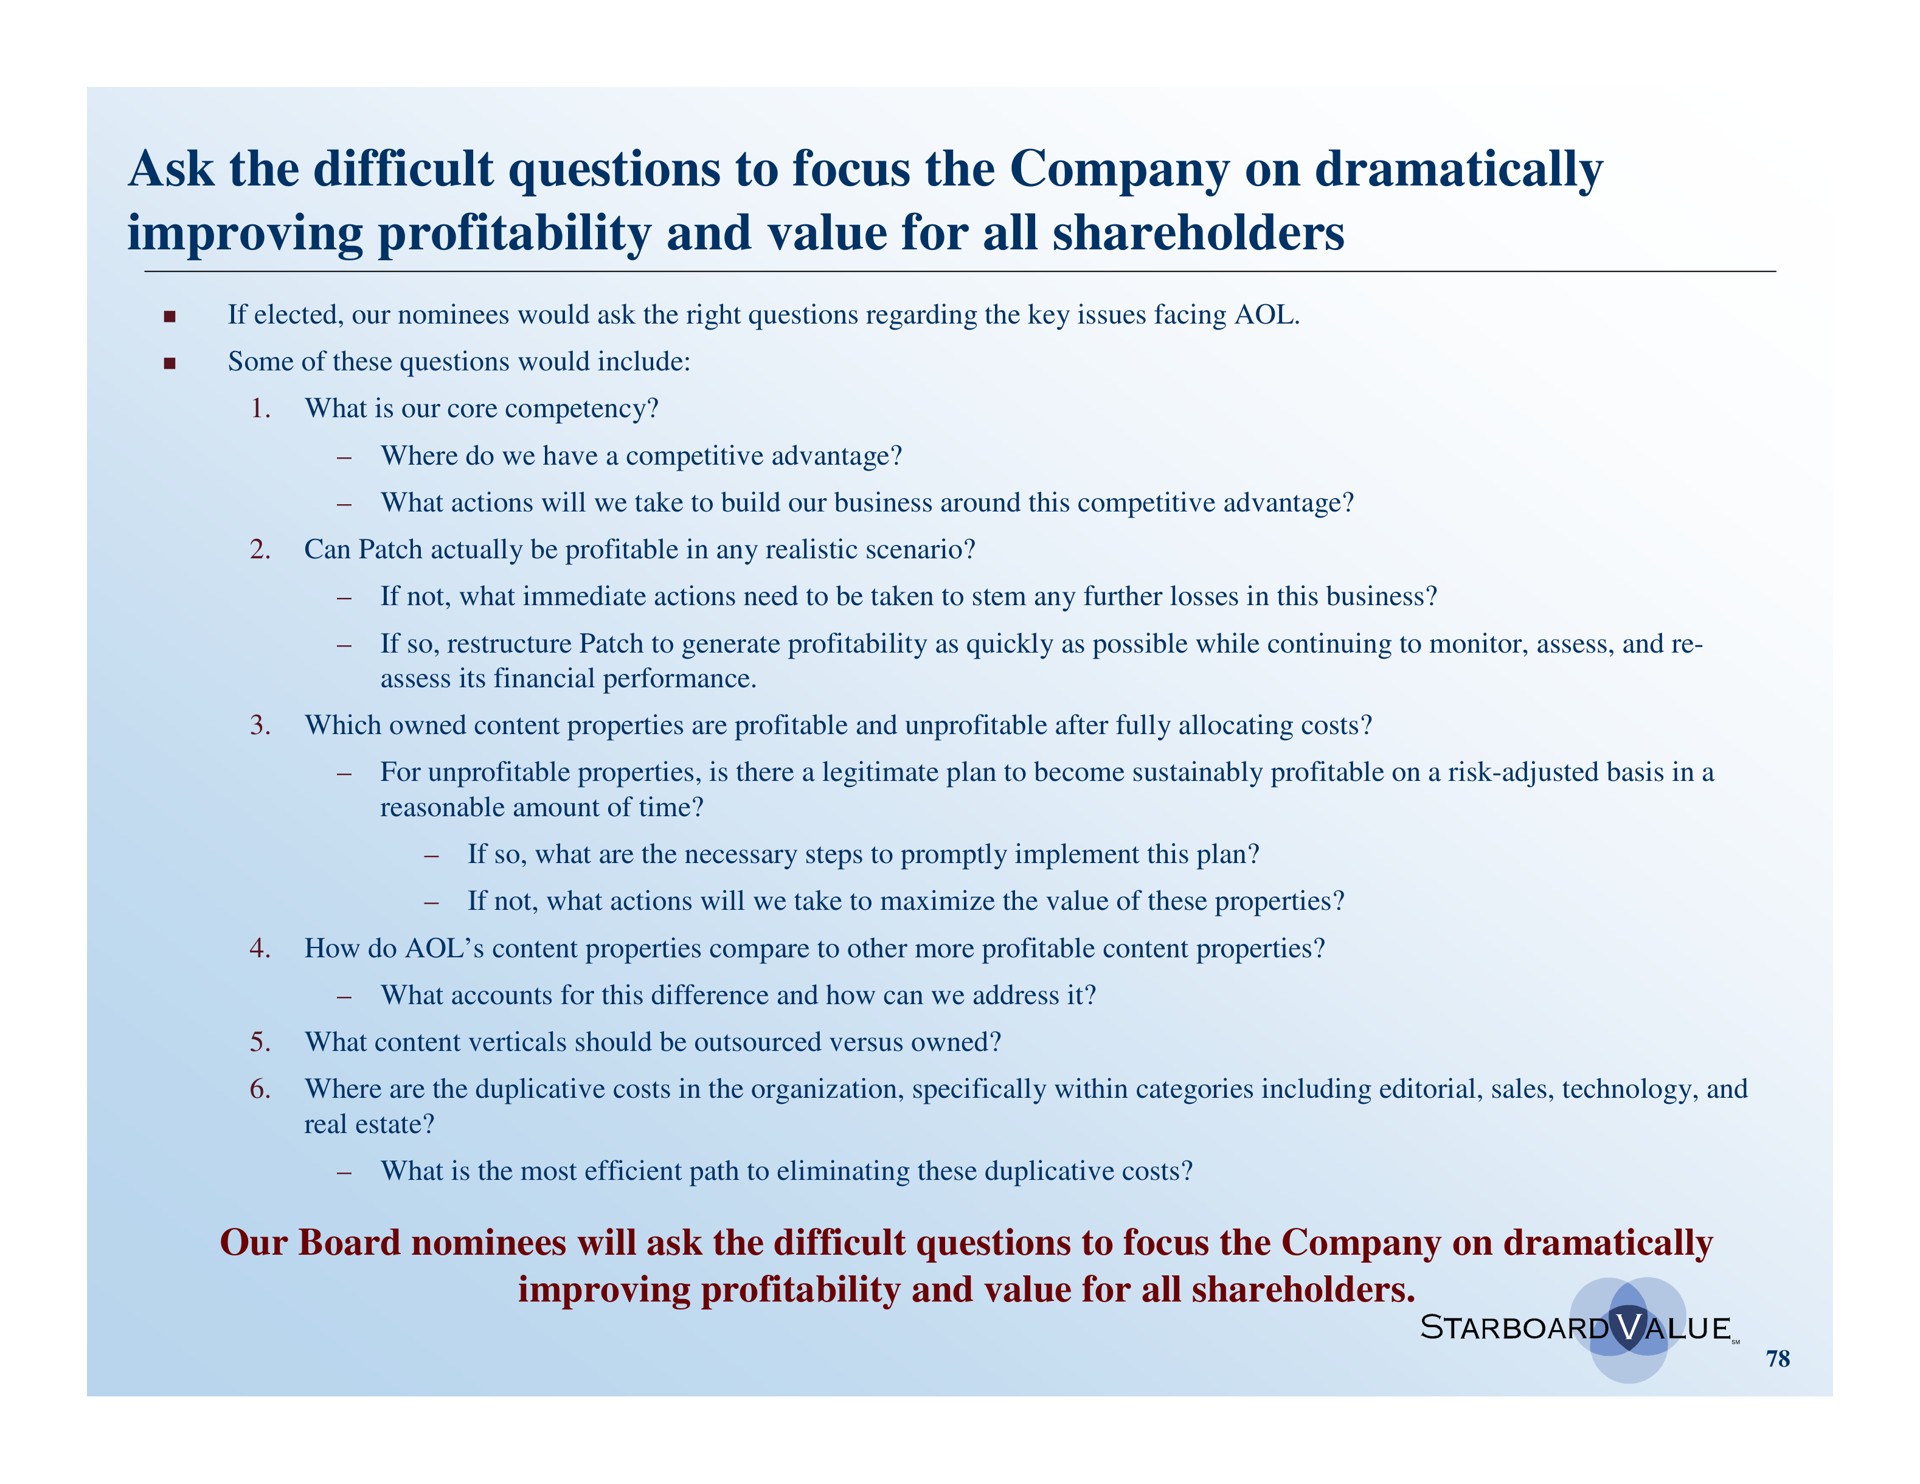 ask the difficult questions to focus the company on dramatically improving profitability and value for all shareholders | Starboard Value